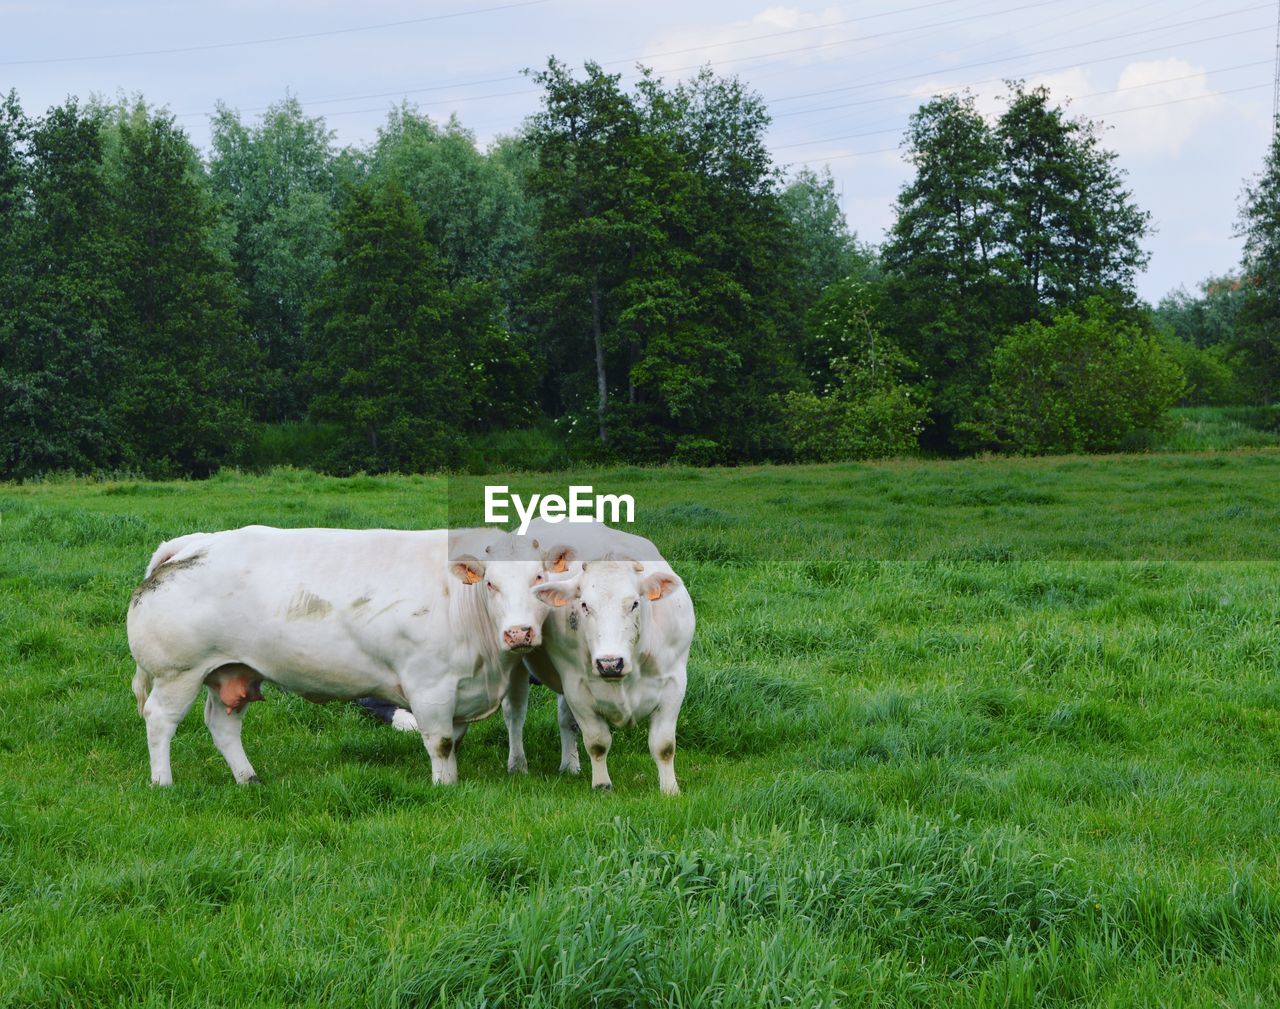 COWS ON A FIELD